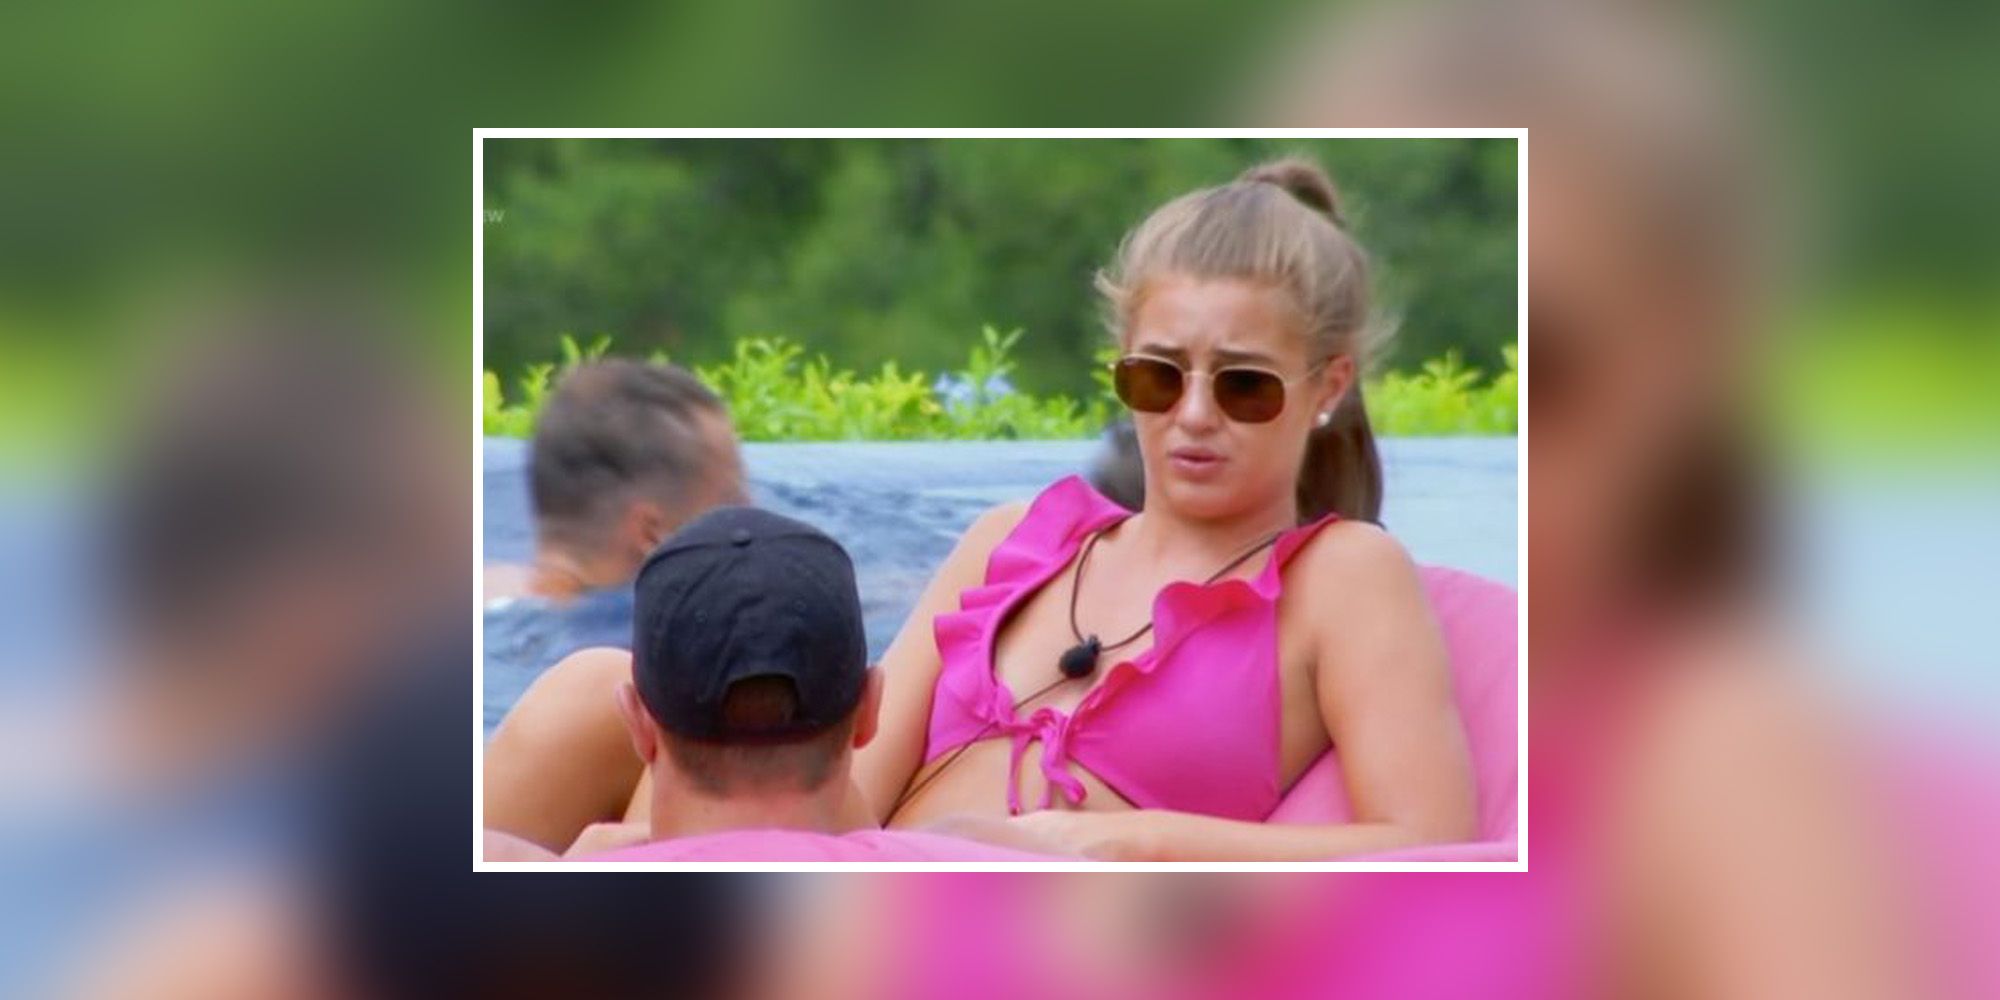 Why no-one on Love Island uses the swimming pool